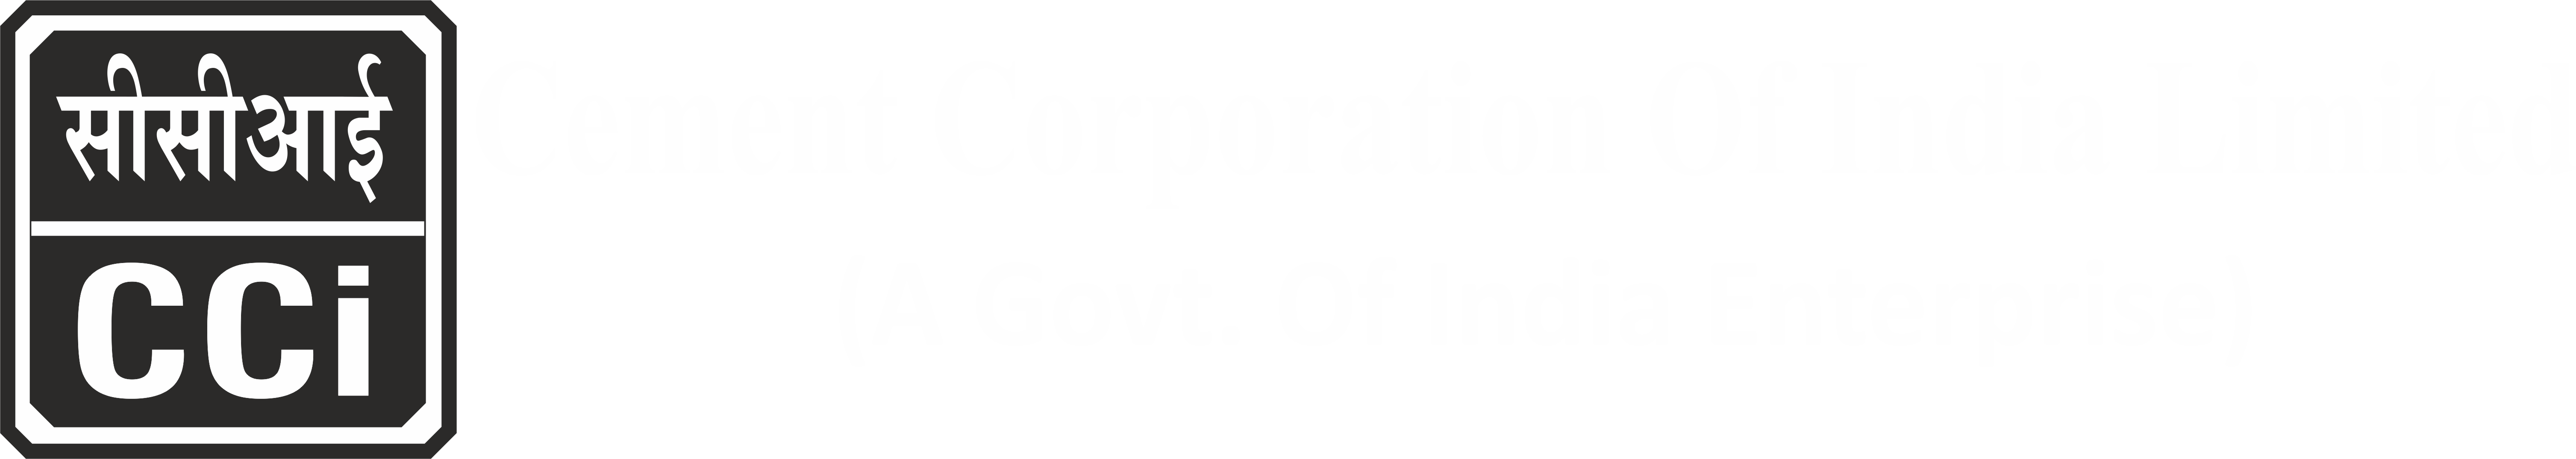 Logo of Cement Corporation of India Limited, CCI